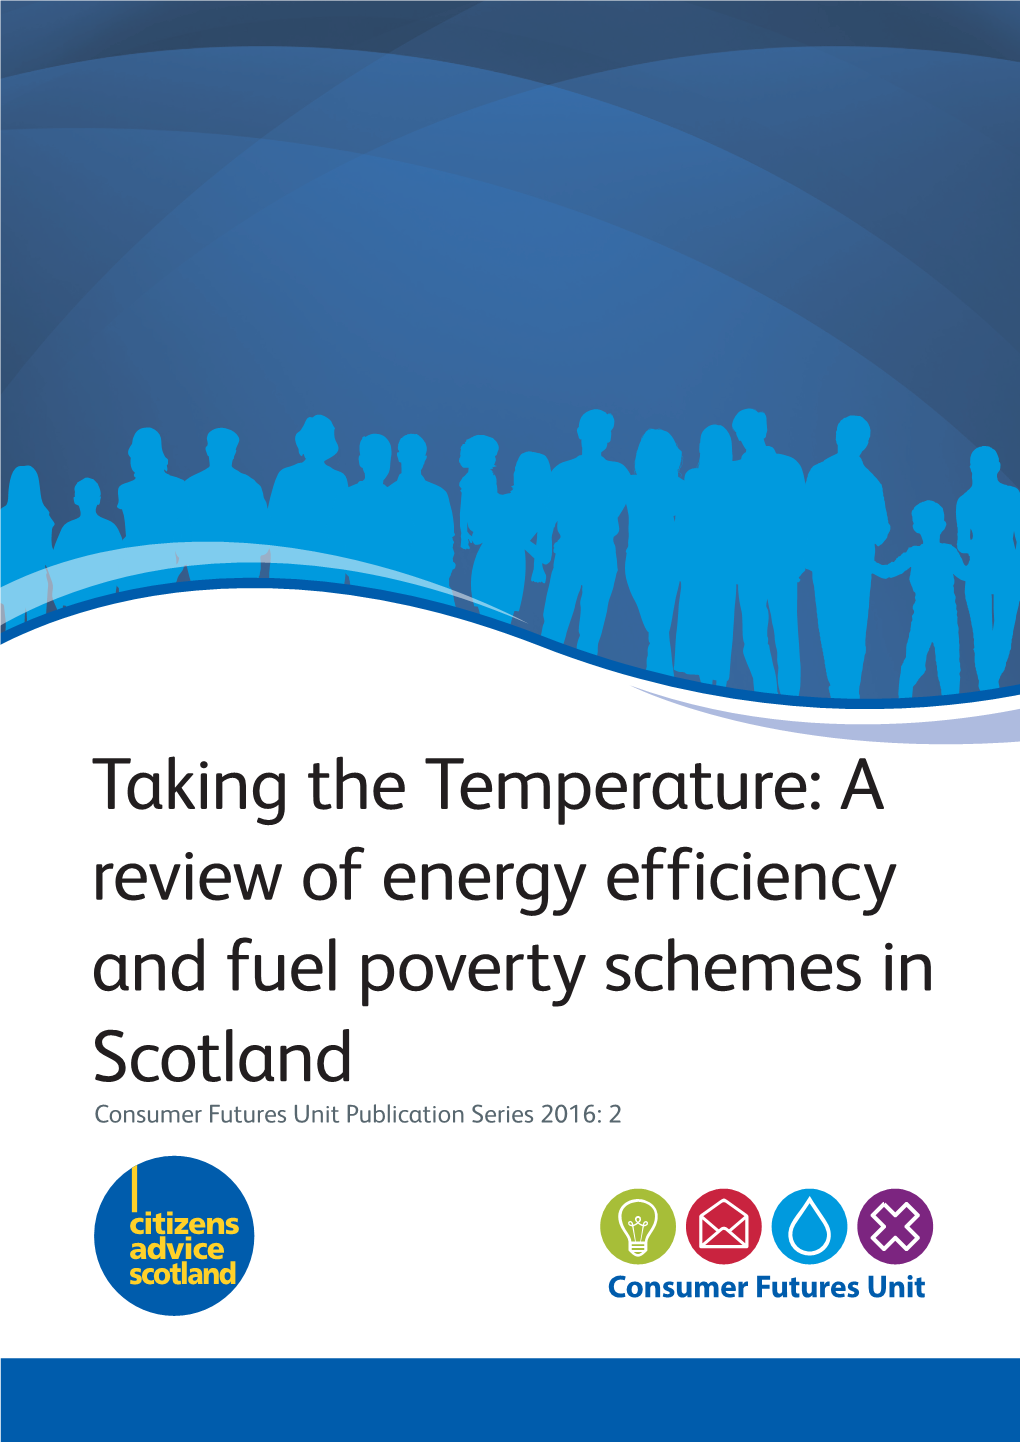 Taking the Temperature: a Review of Energy Efficiency and Fuel Poverty